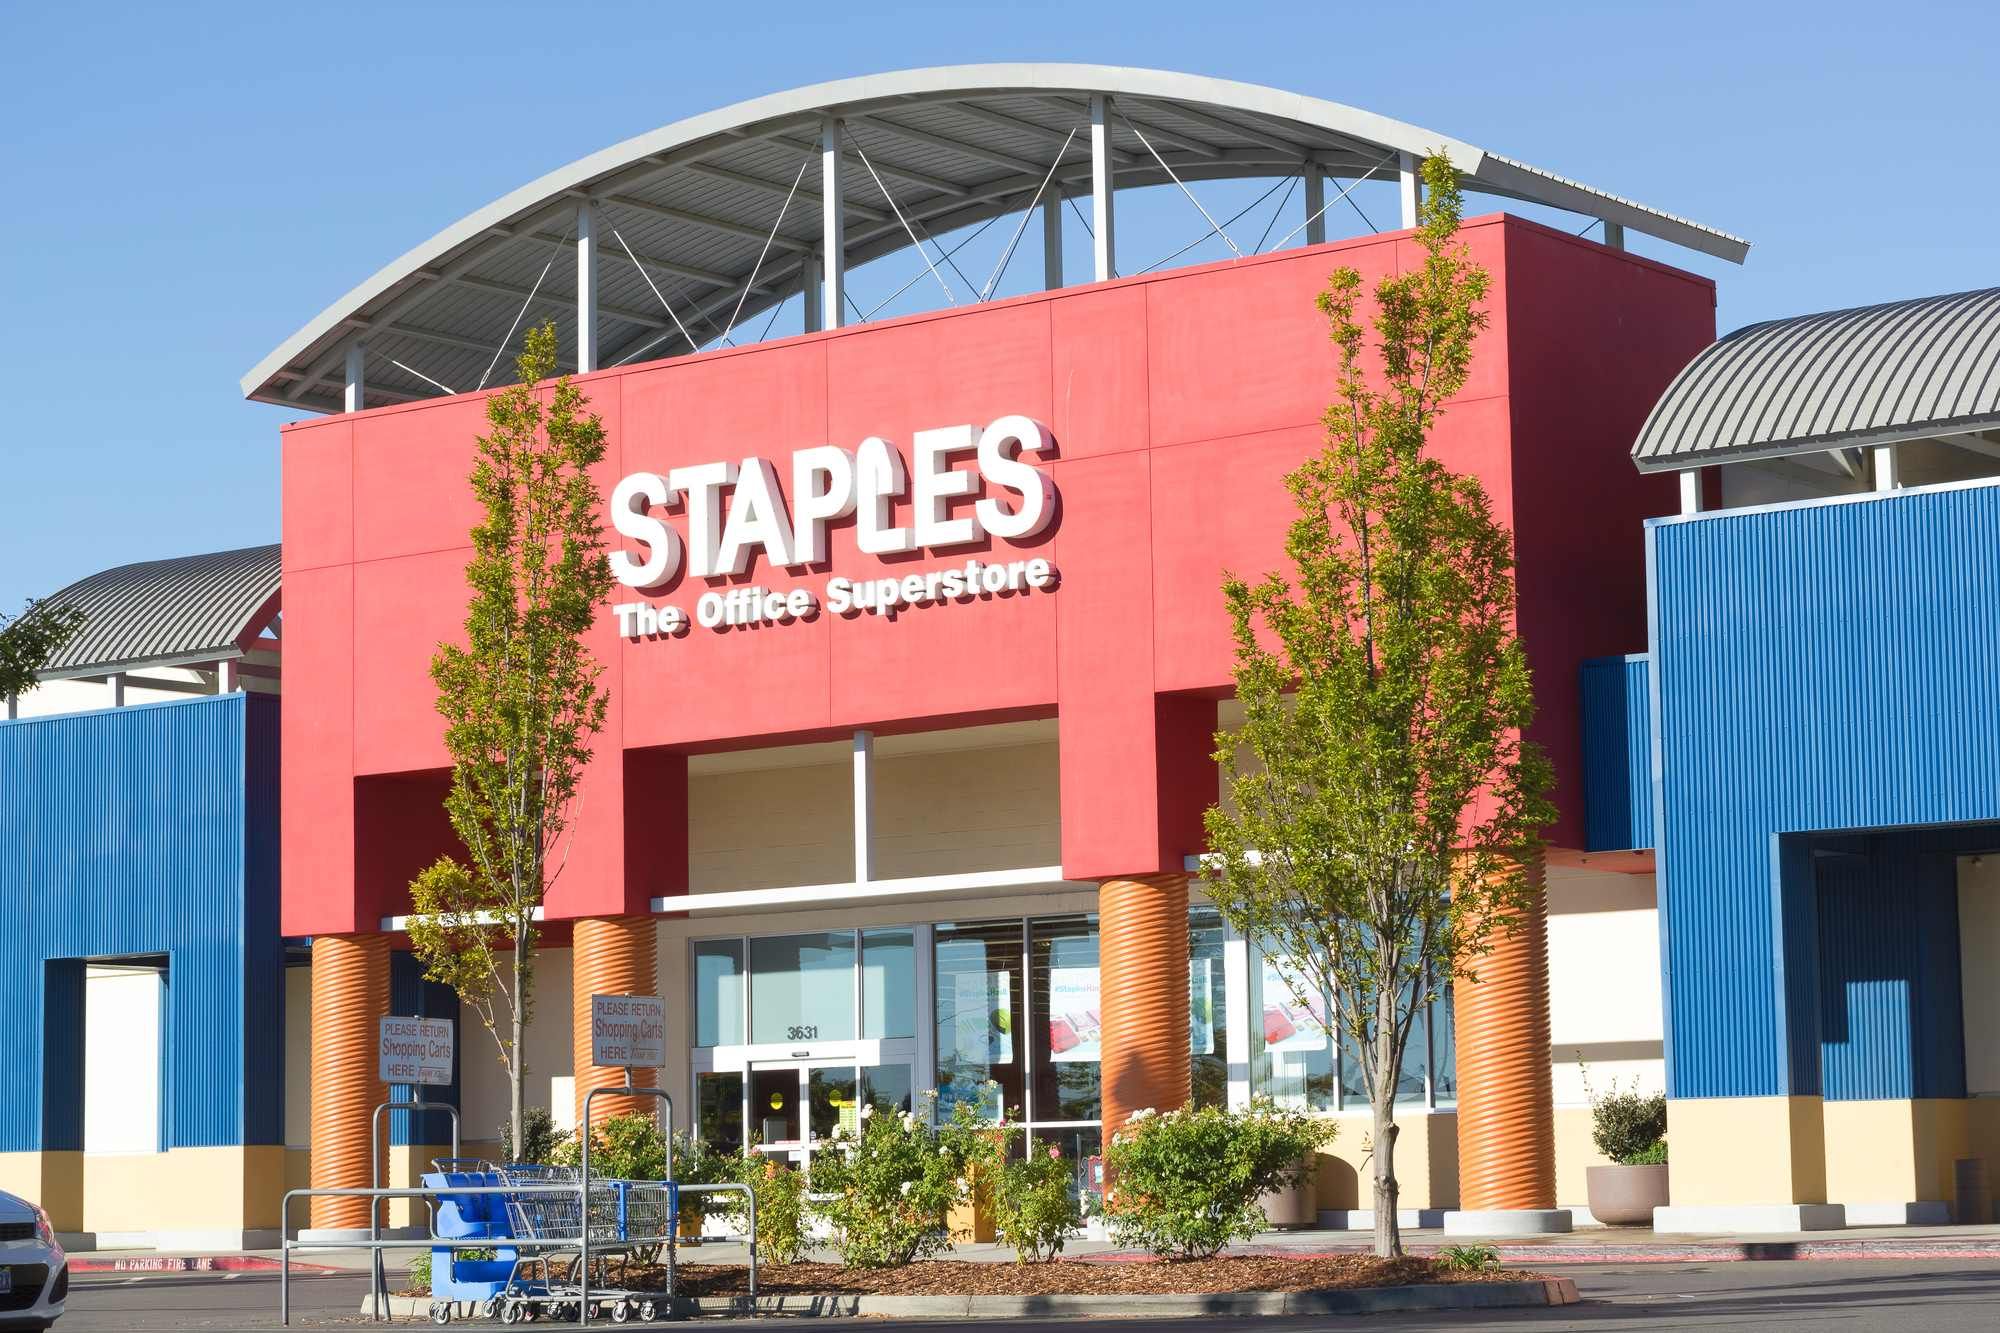 Staples canada regarding the class action lawsuit filed 